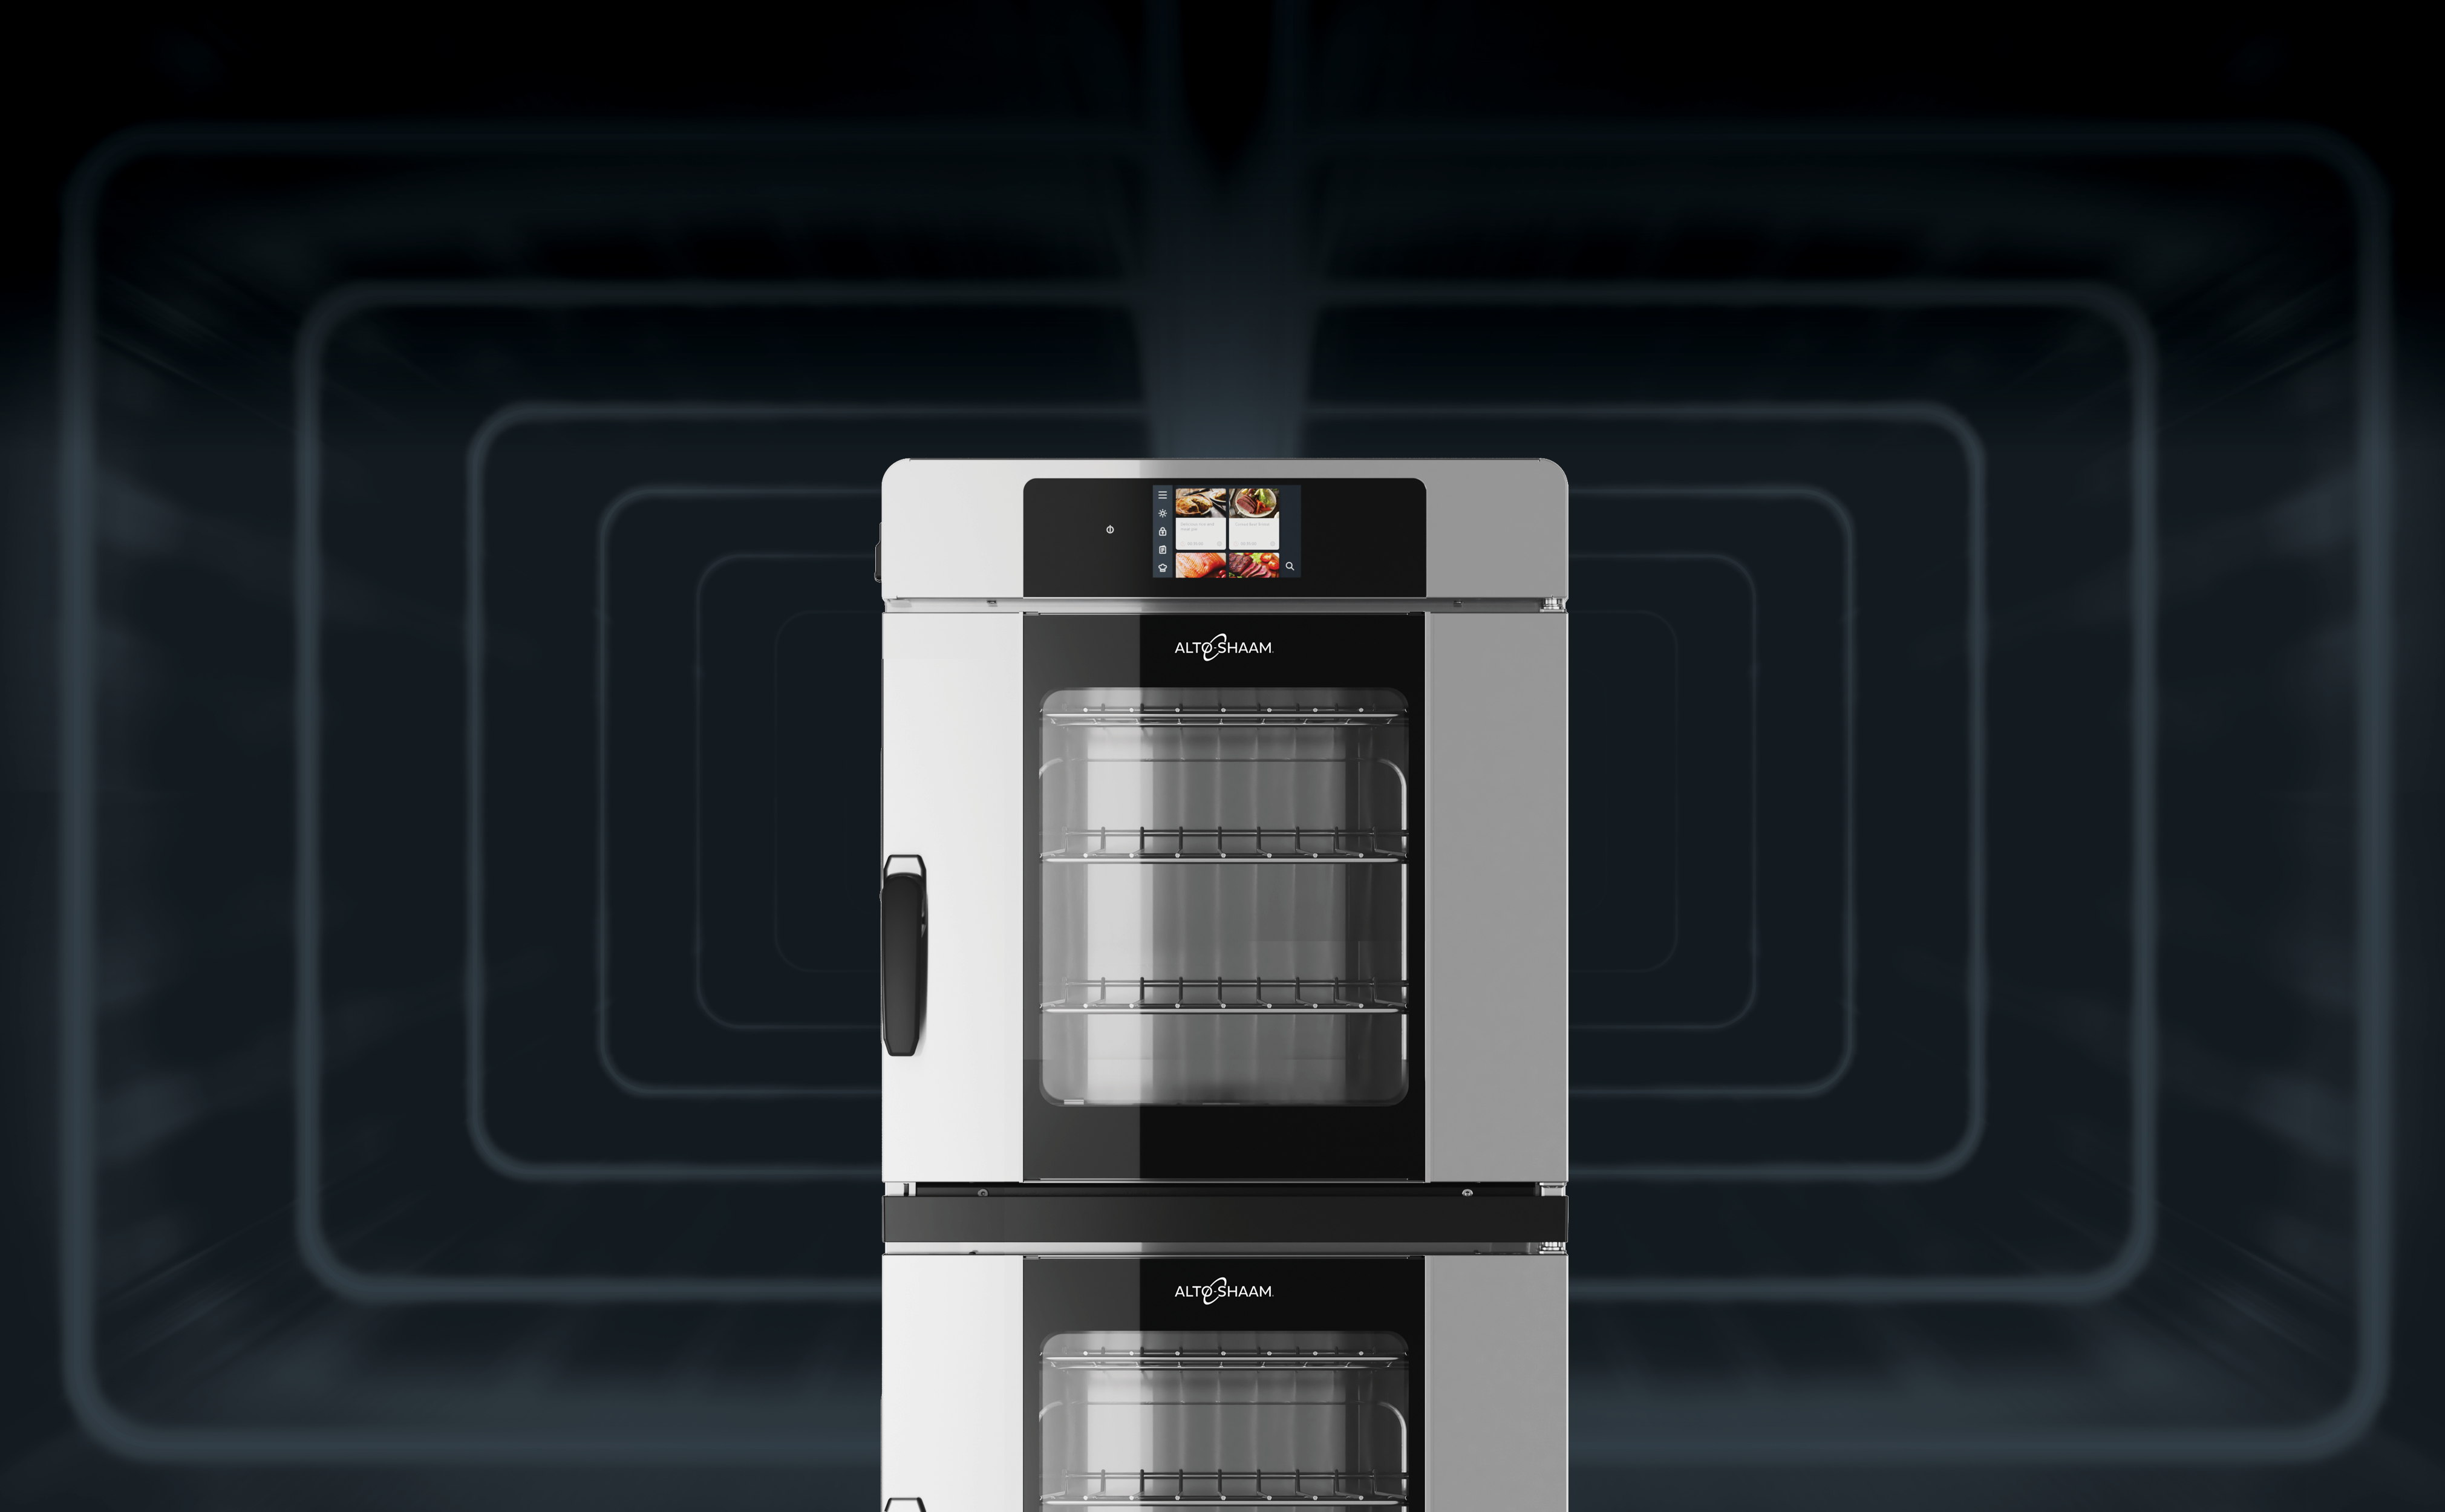 Cook & Hold Ovens